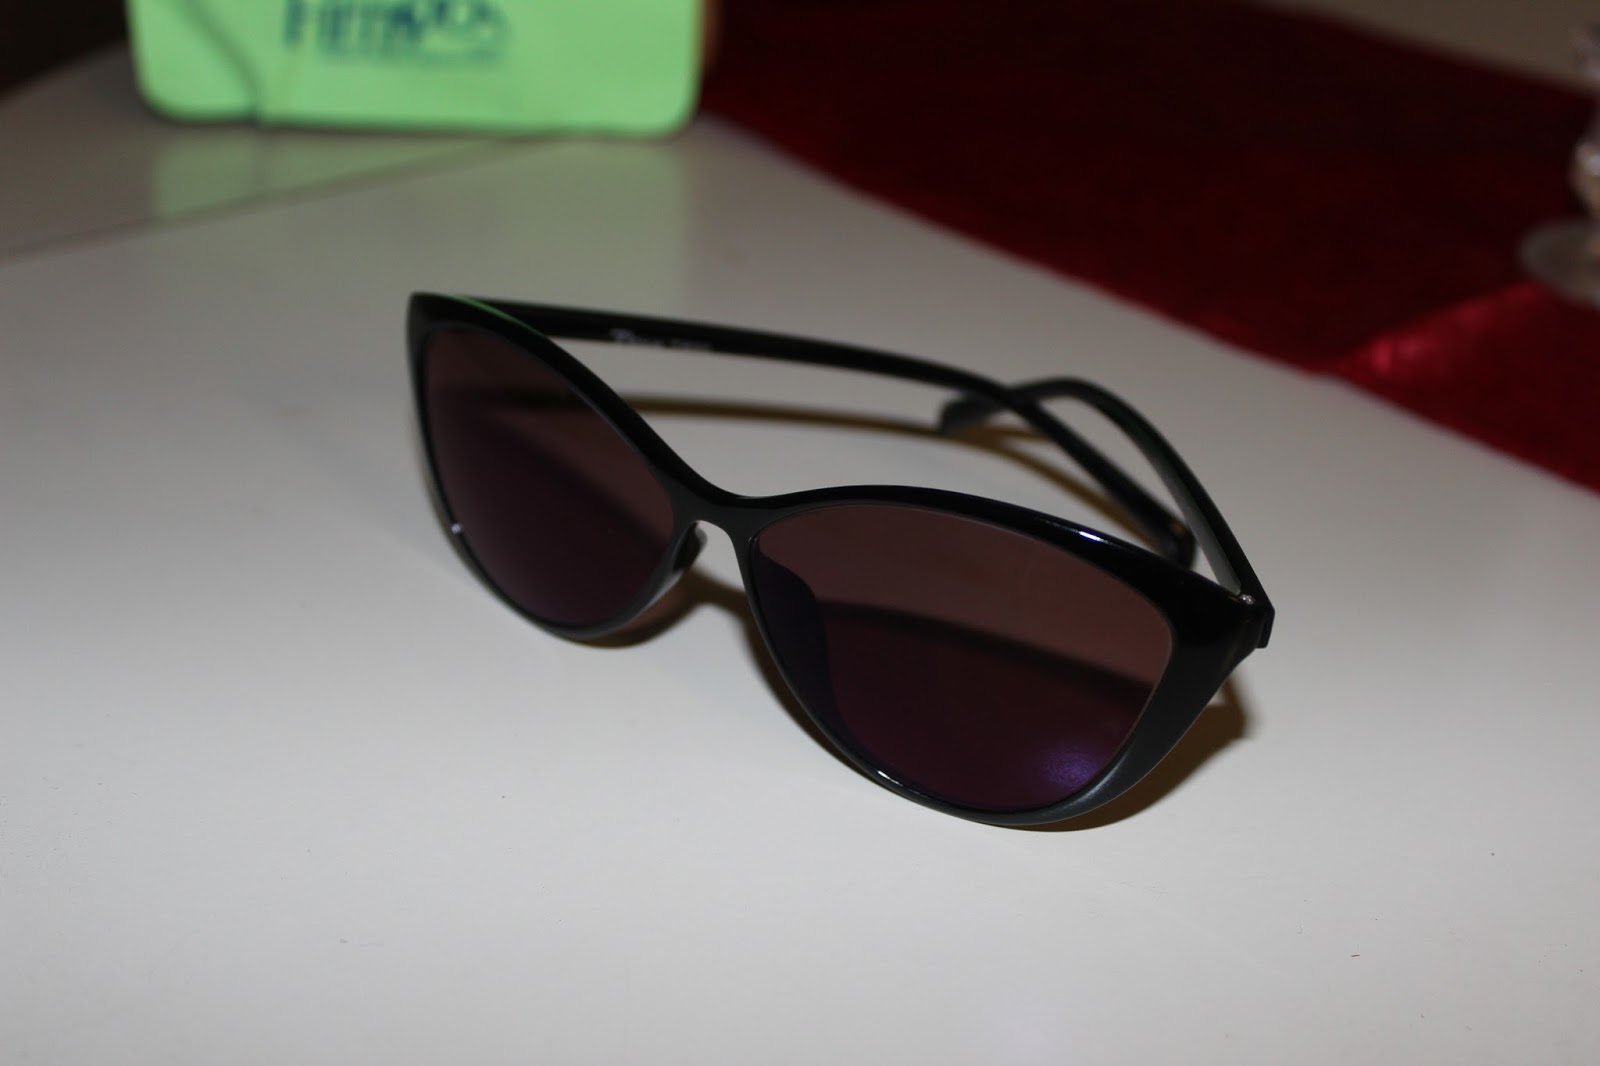 Fashion | Firmoo Glasses Review | FabEllis